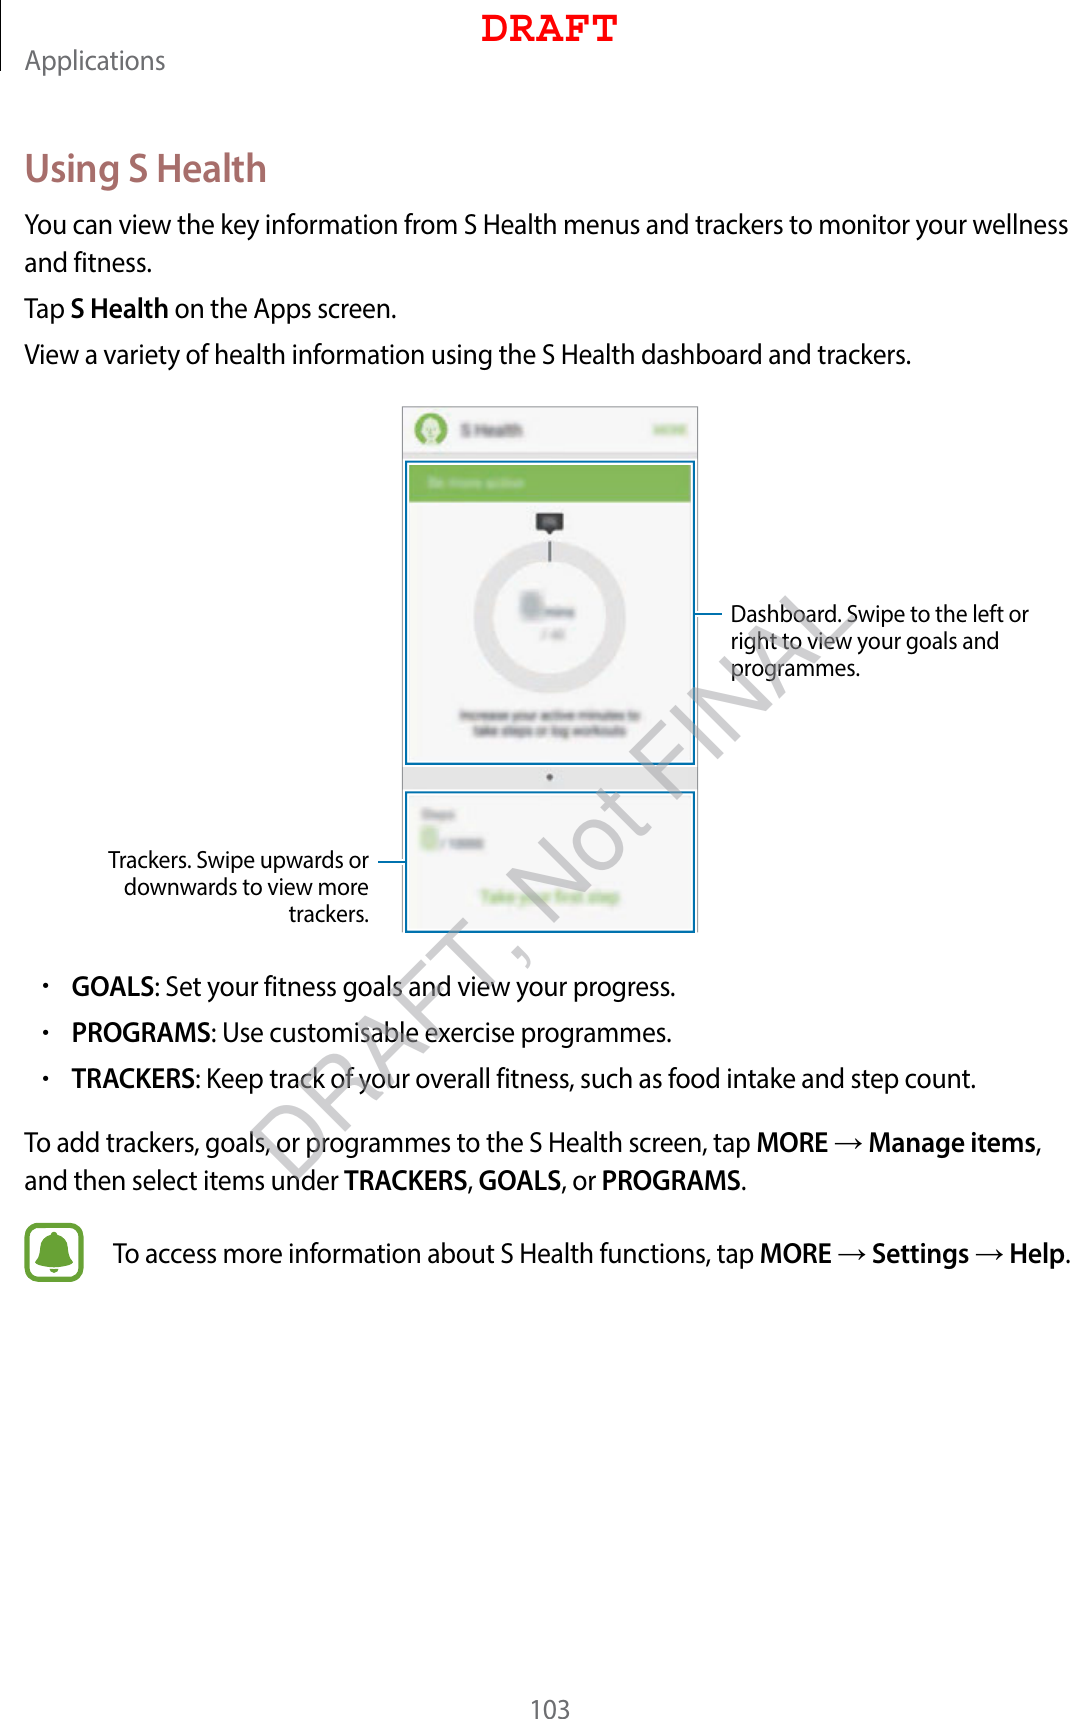 Applications103Using S HealthYou can view the key information from S Health menus and trackers to monitor your wellness and fitness.Tap S Health on the Apps screen.View a variety of health information using the S Health dashboard and trackers.Trackers. Swipe upwards or downwards to view more trackers.Dashboard. Swipe to the left or right to view your goals and programmes.•GOALS: Set your fitness goals and view your progress.•PROGRAMS: Use customisable exercise programmes.•TRACKERS: Keep track of your overall fitness, such as food intake and step count.To add trackers, goals, or programmes to the S Health screen, tap MORE  Manage items, and then select items under TRACKERS, GOALS, or PROGRAMS.To access more information about S Health functions, tap MORE  Settings  Help.DRAFTDRAFT, Not FINAL